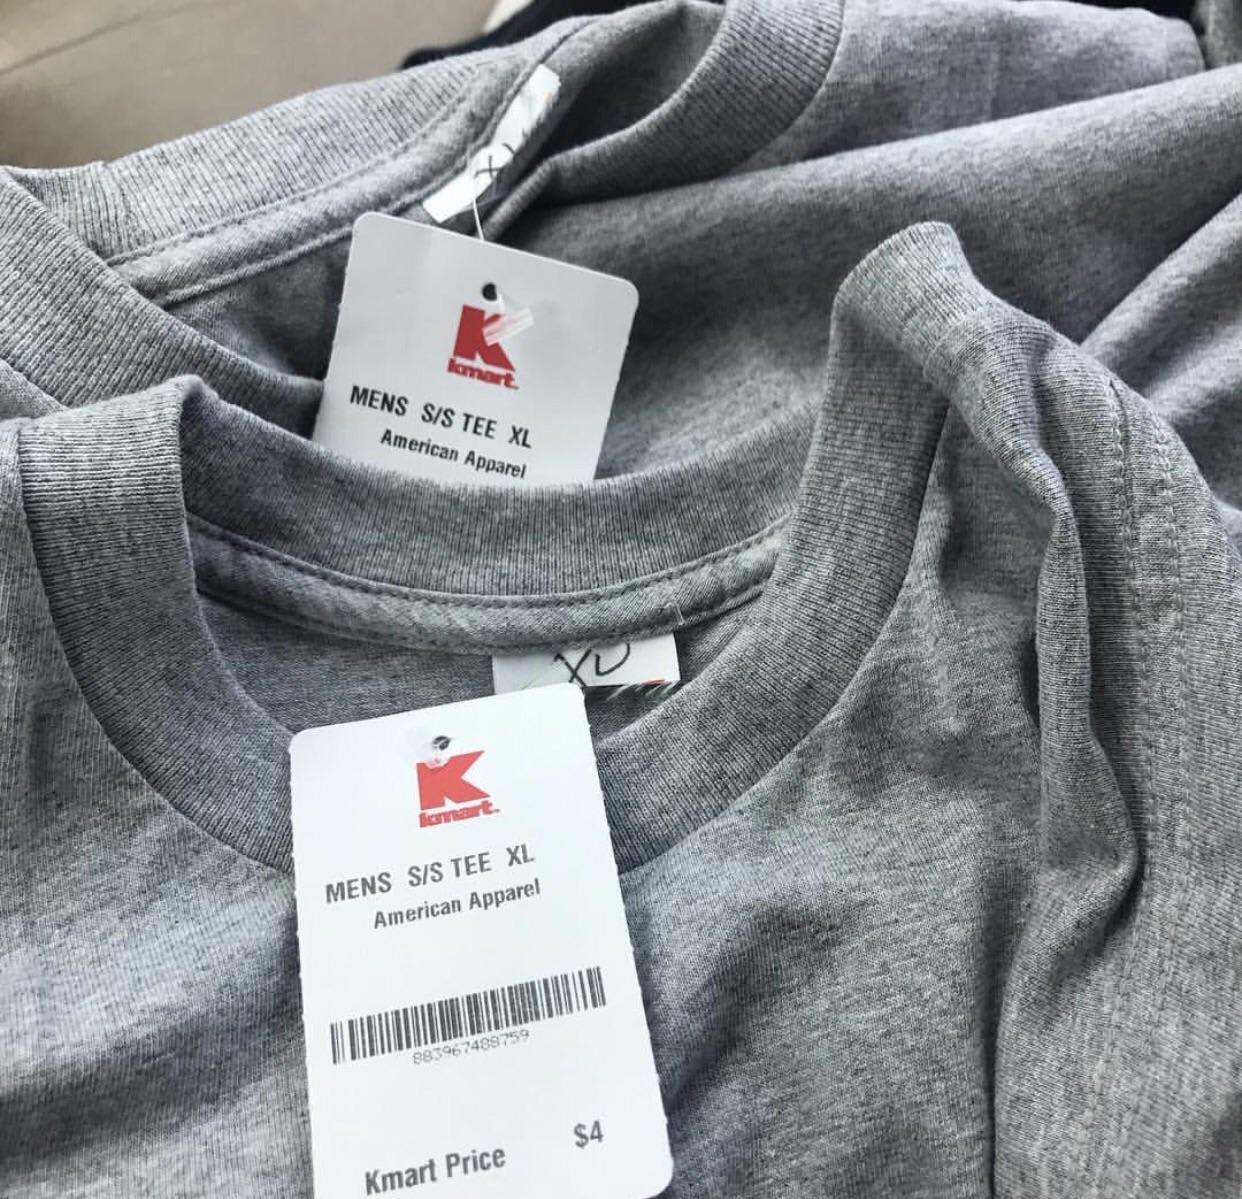 Blank Kmart Supreme Shirt with Cut off Tag.